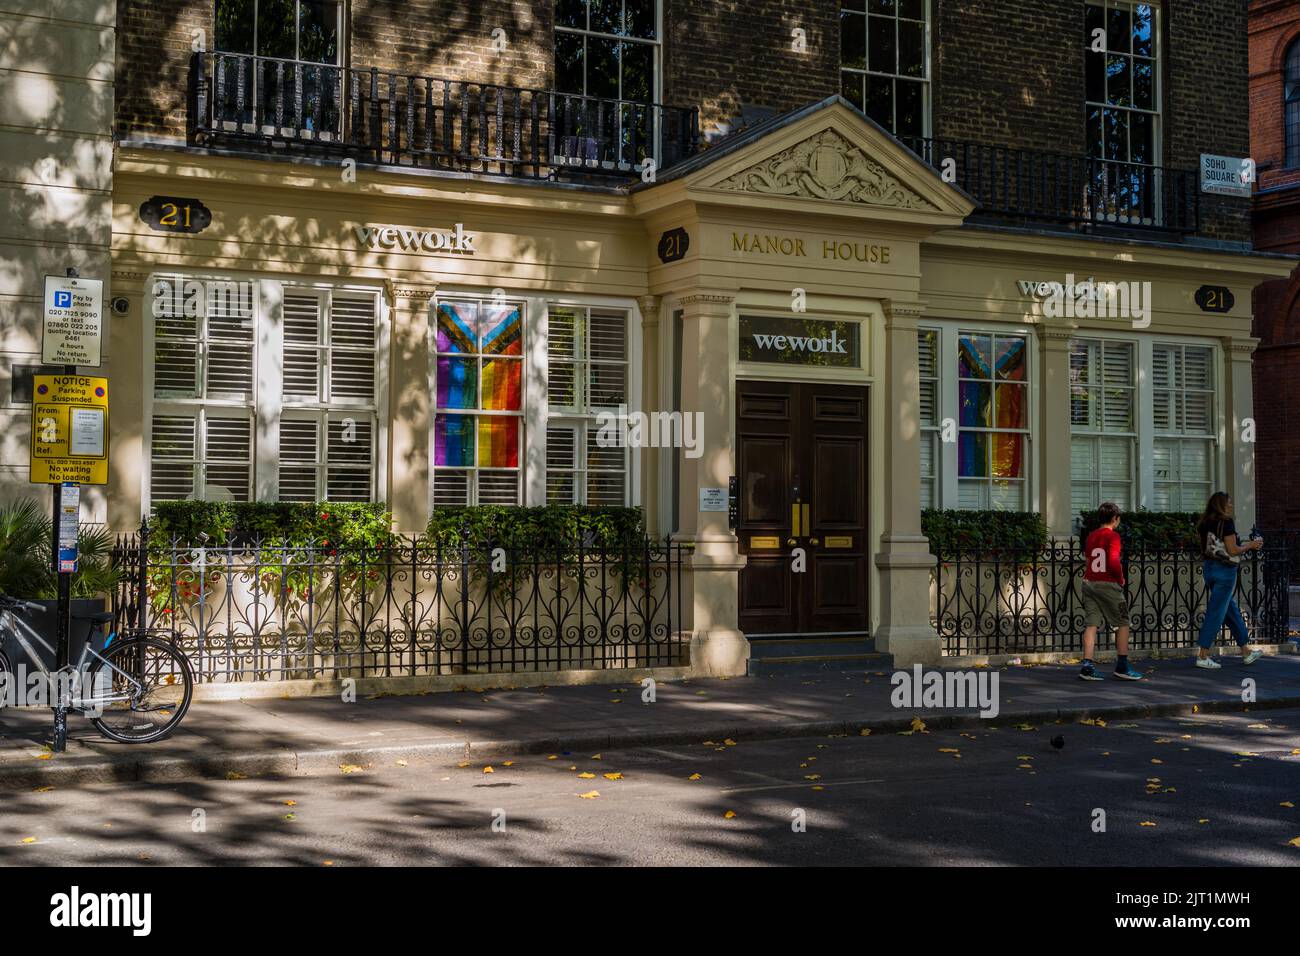 WeWork Soho London - WeWork Offices in Soho Square in Central London UK Stock Photo